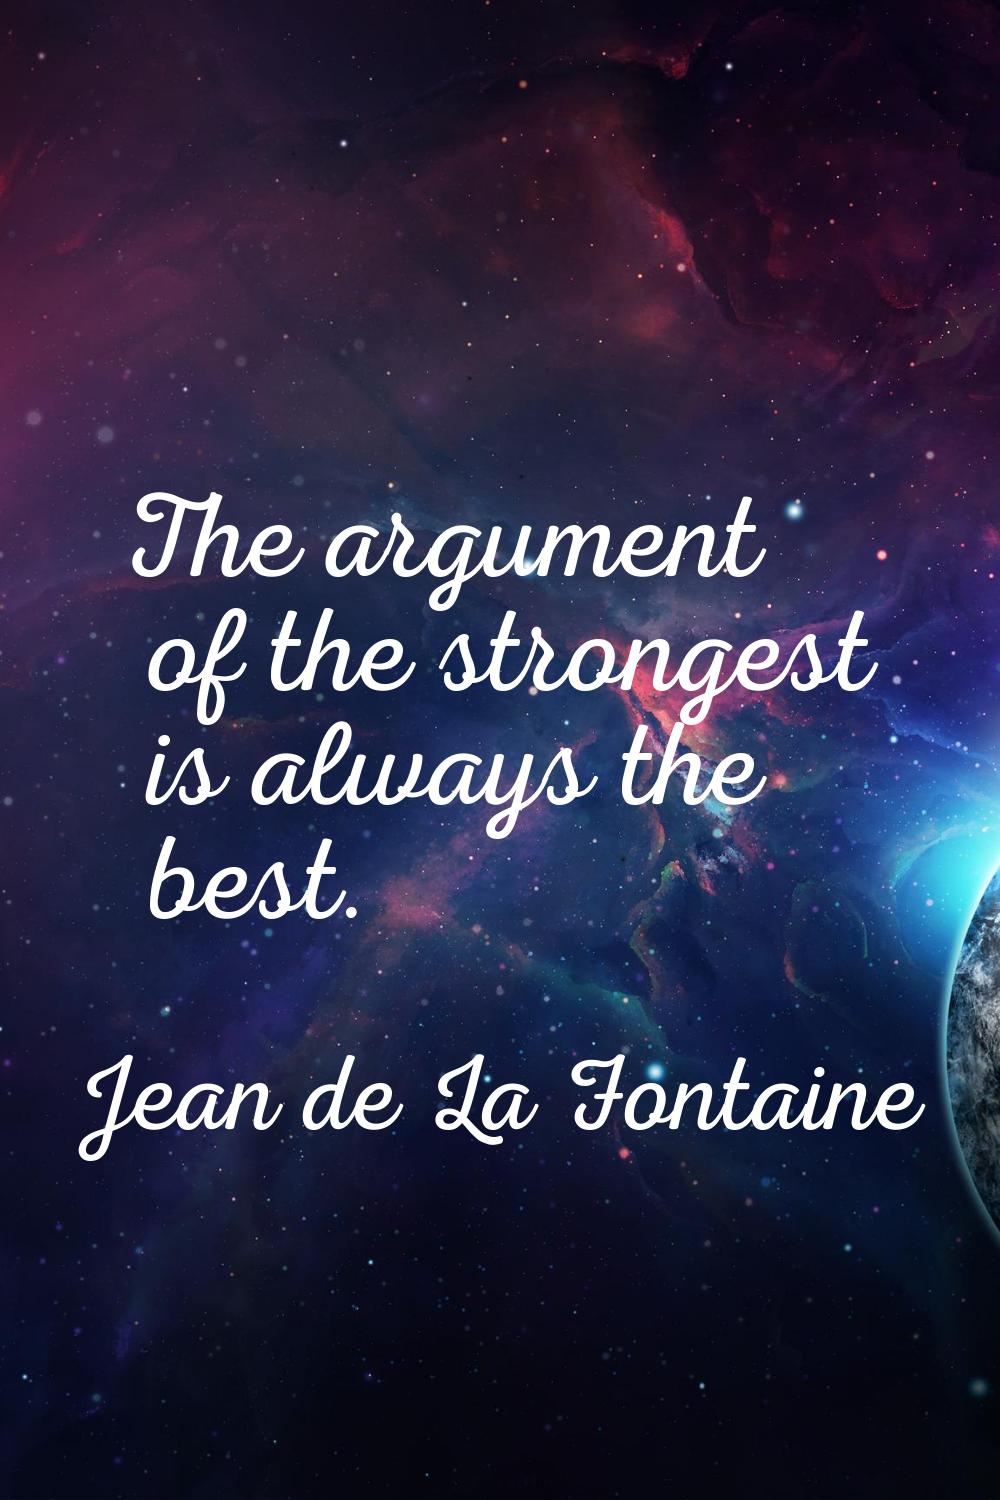 The argument of the strongest is always the best.